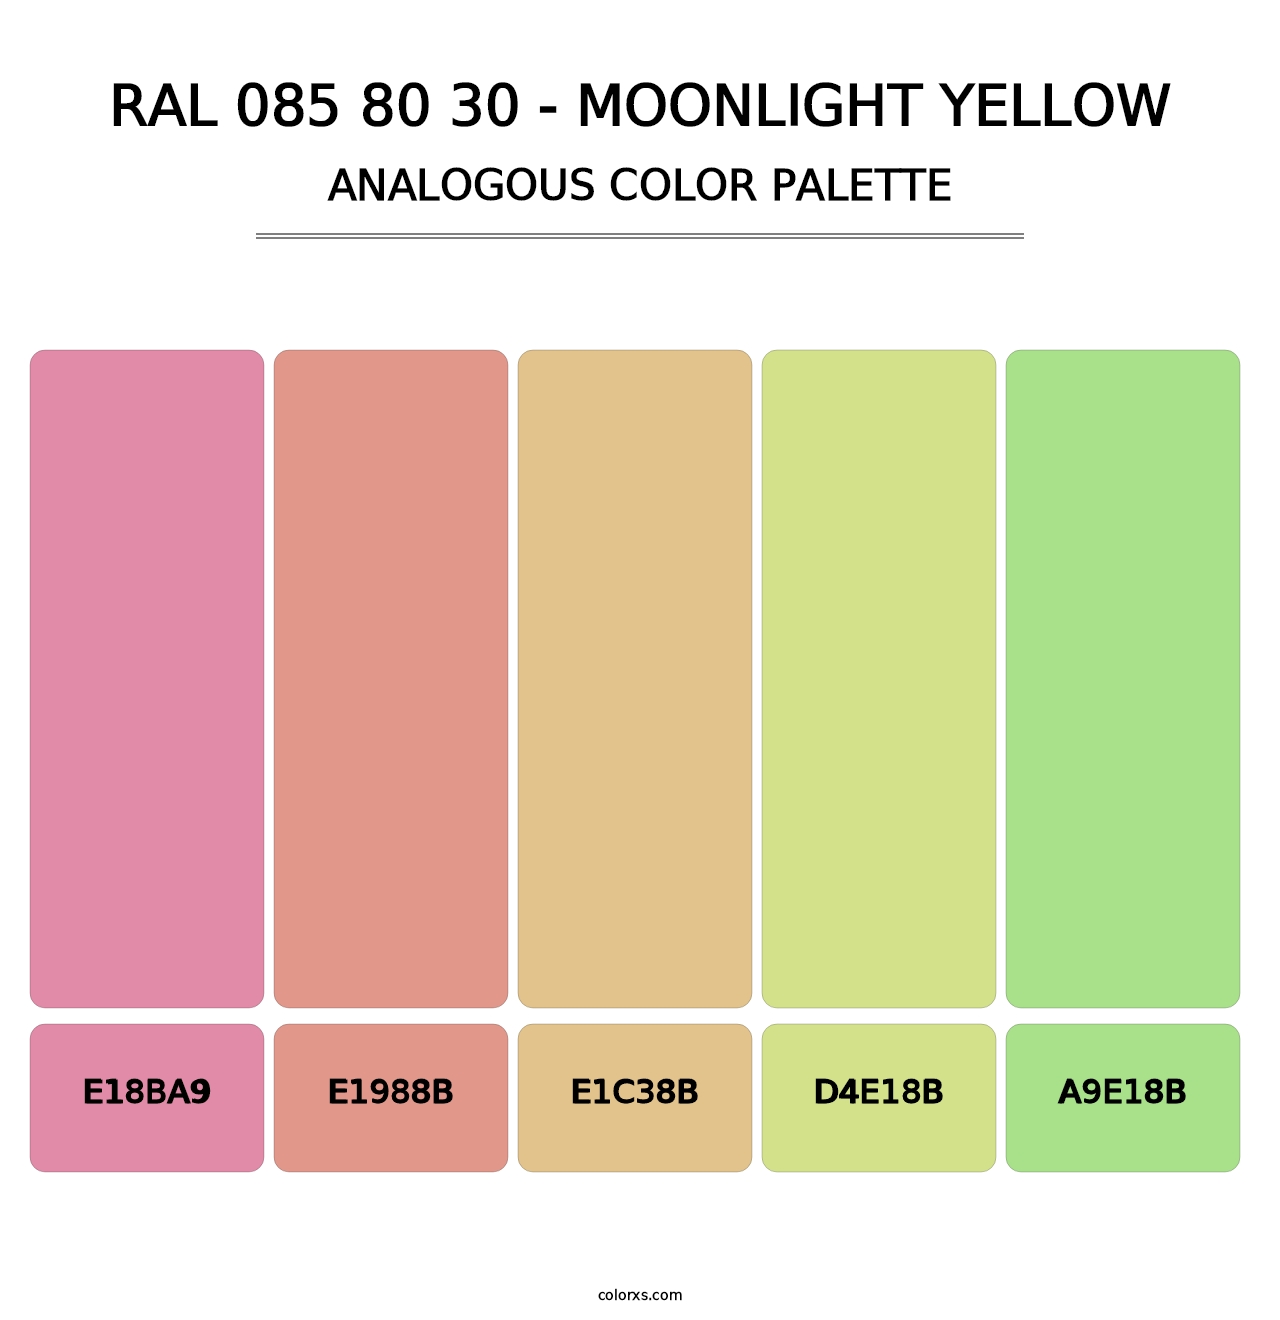 RAL 085 80 30 - Moonlight Yellow - Analogous Color Palette